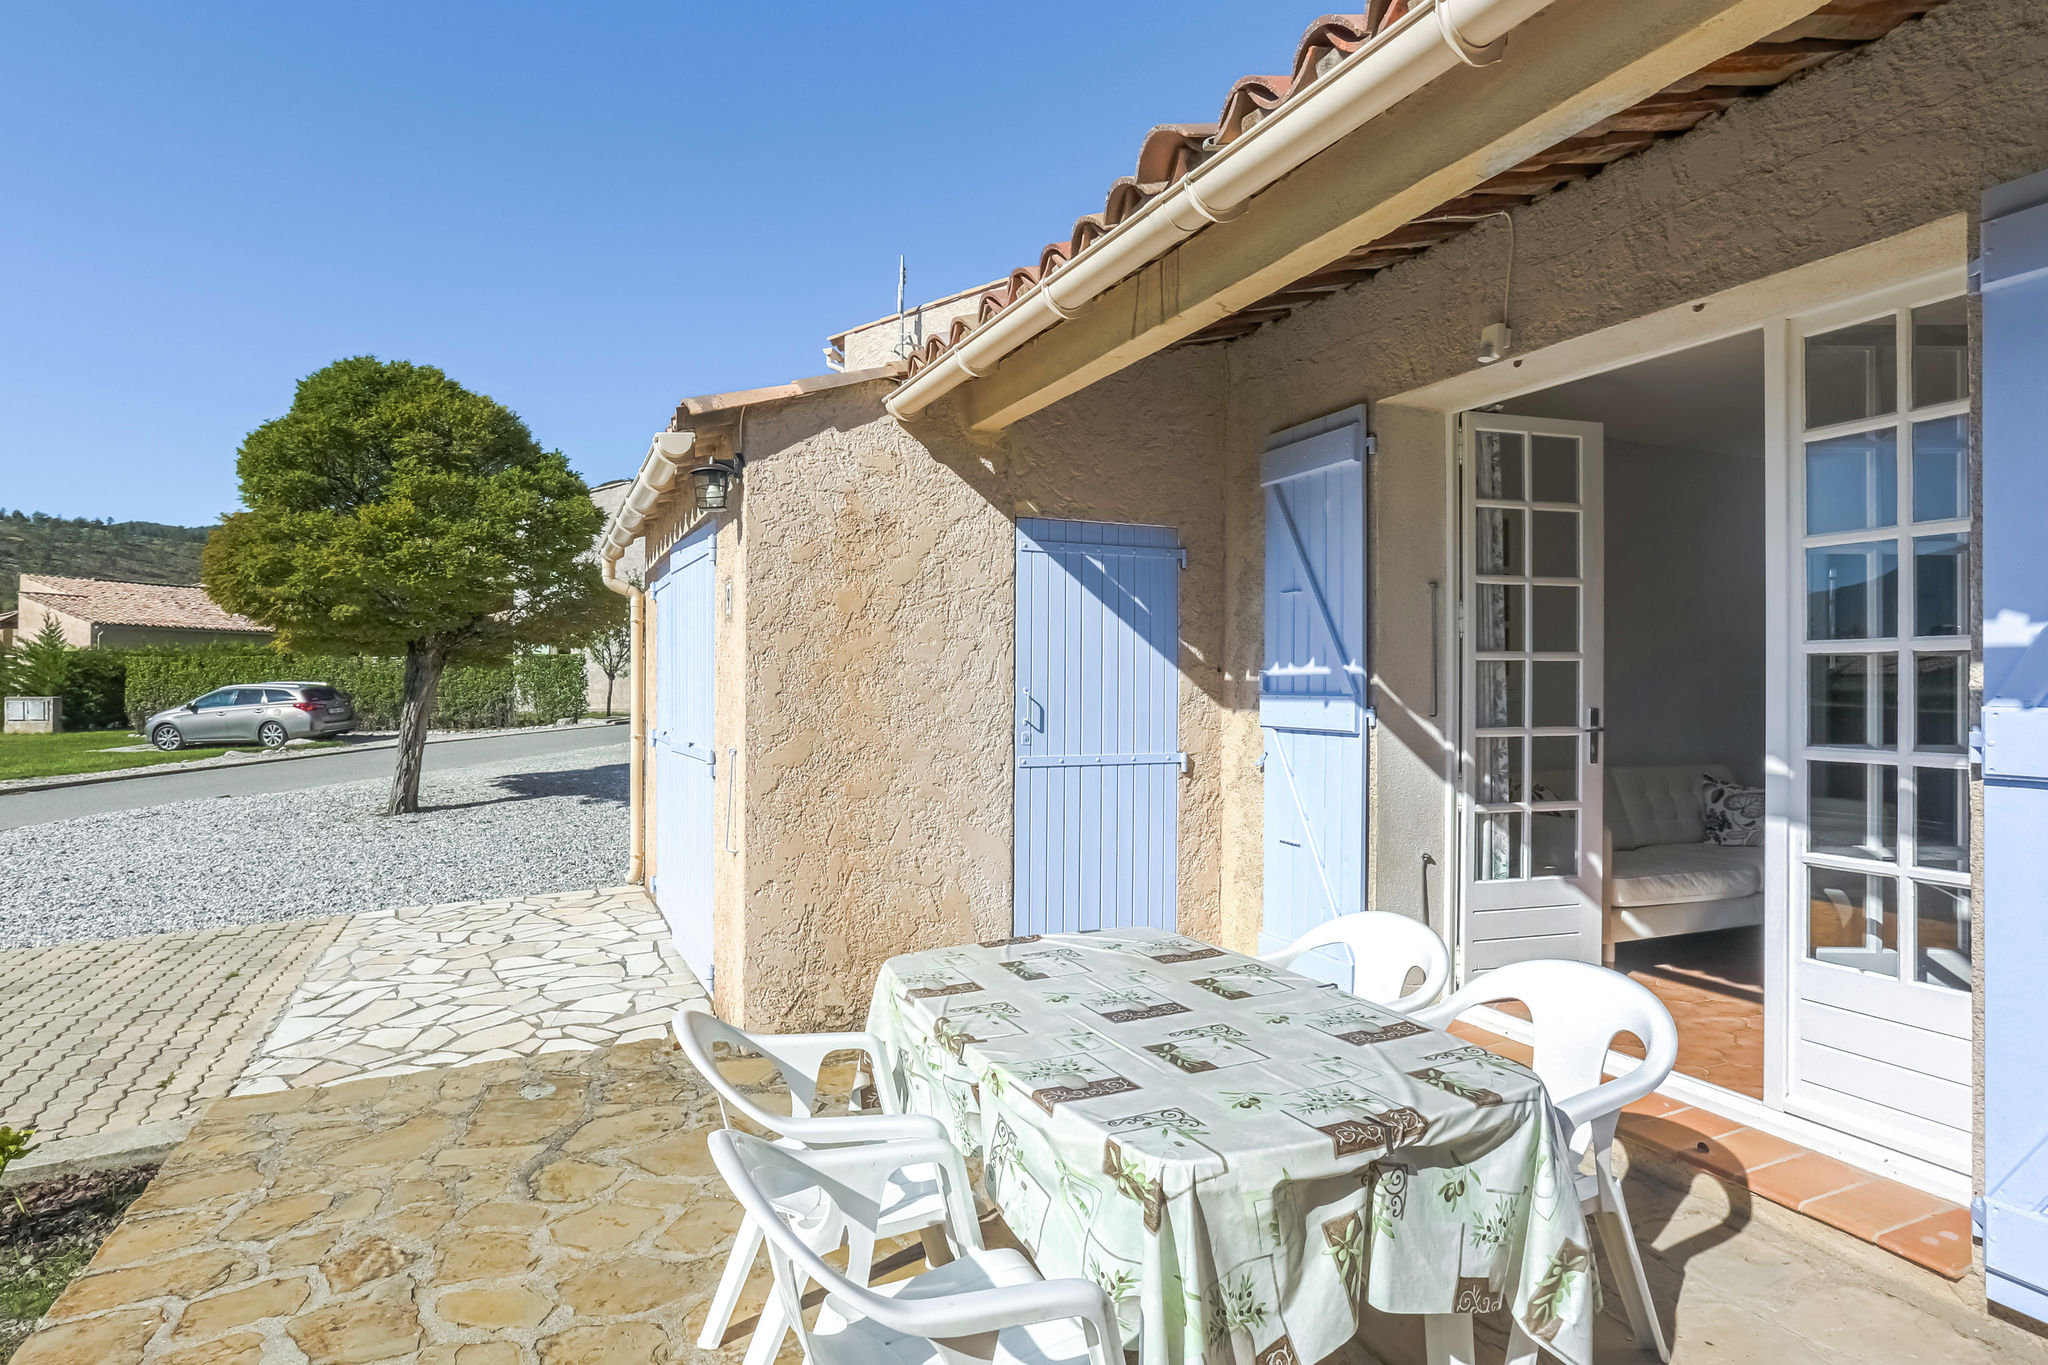 Holiday house nearby the Lac de Castillon; enjoy sun and nature in Provence!